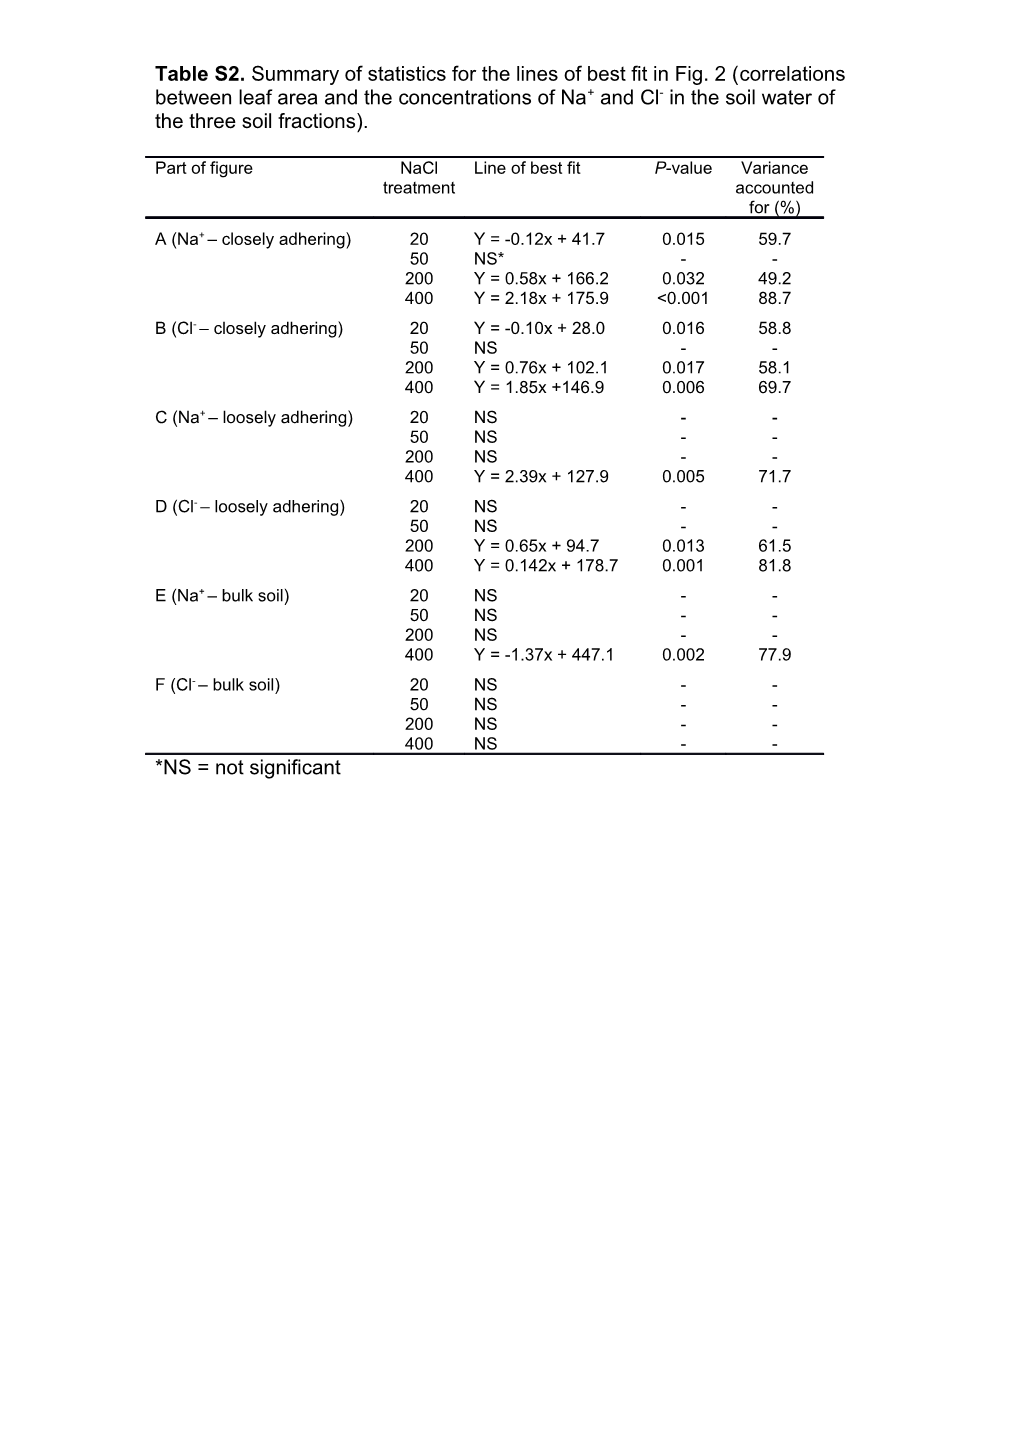 Table S2.Summary of Statistics for the Lines of Best Fit Infig. 2 (Correlations Between